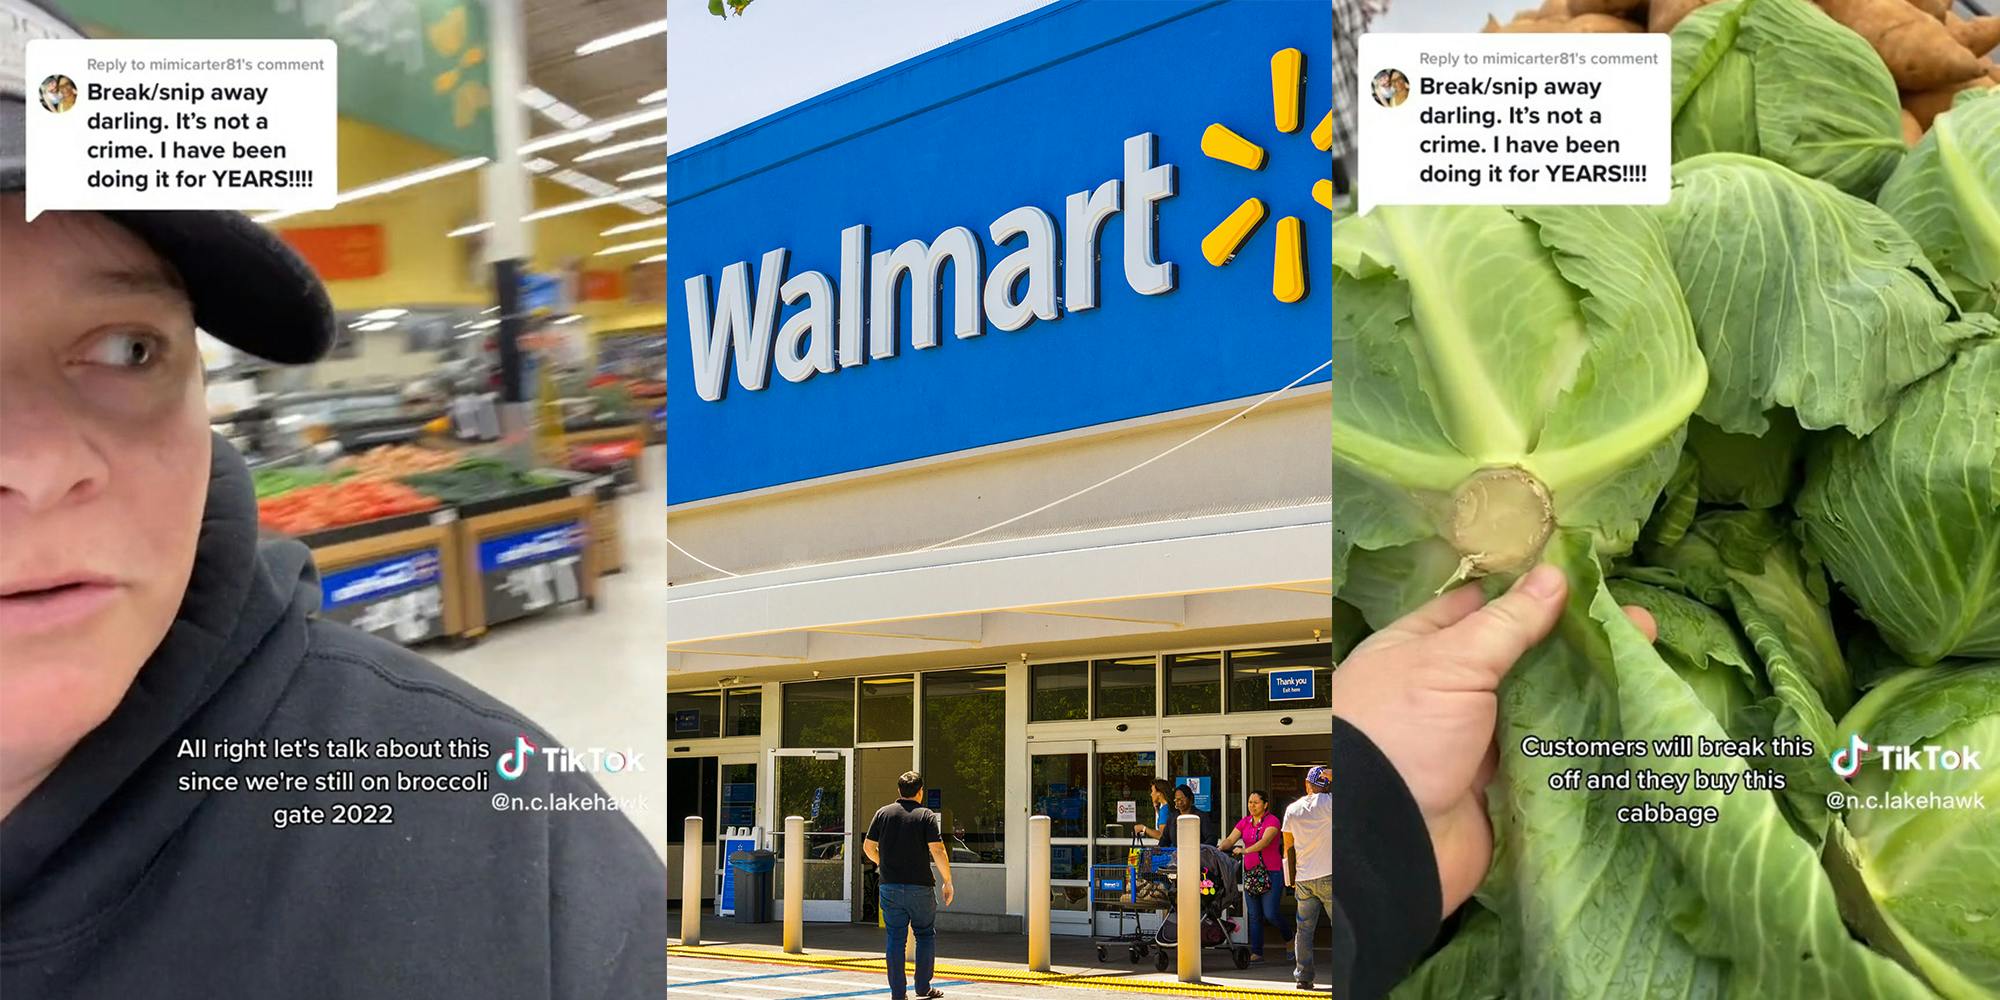 Person gives tips on how to save money with produce at Walmart